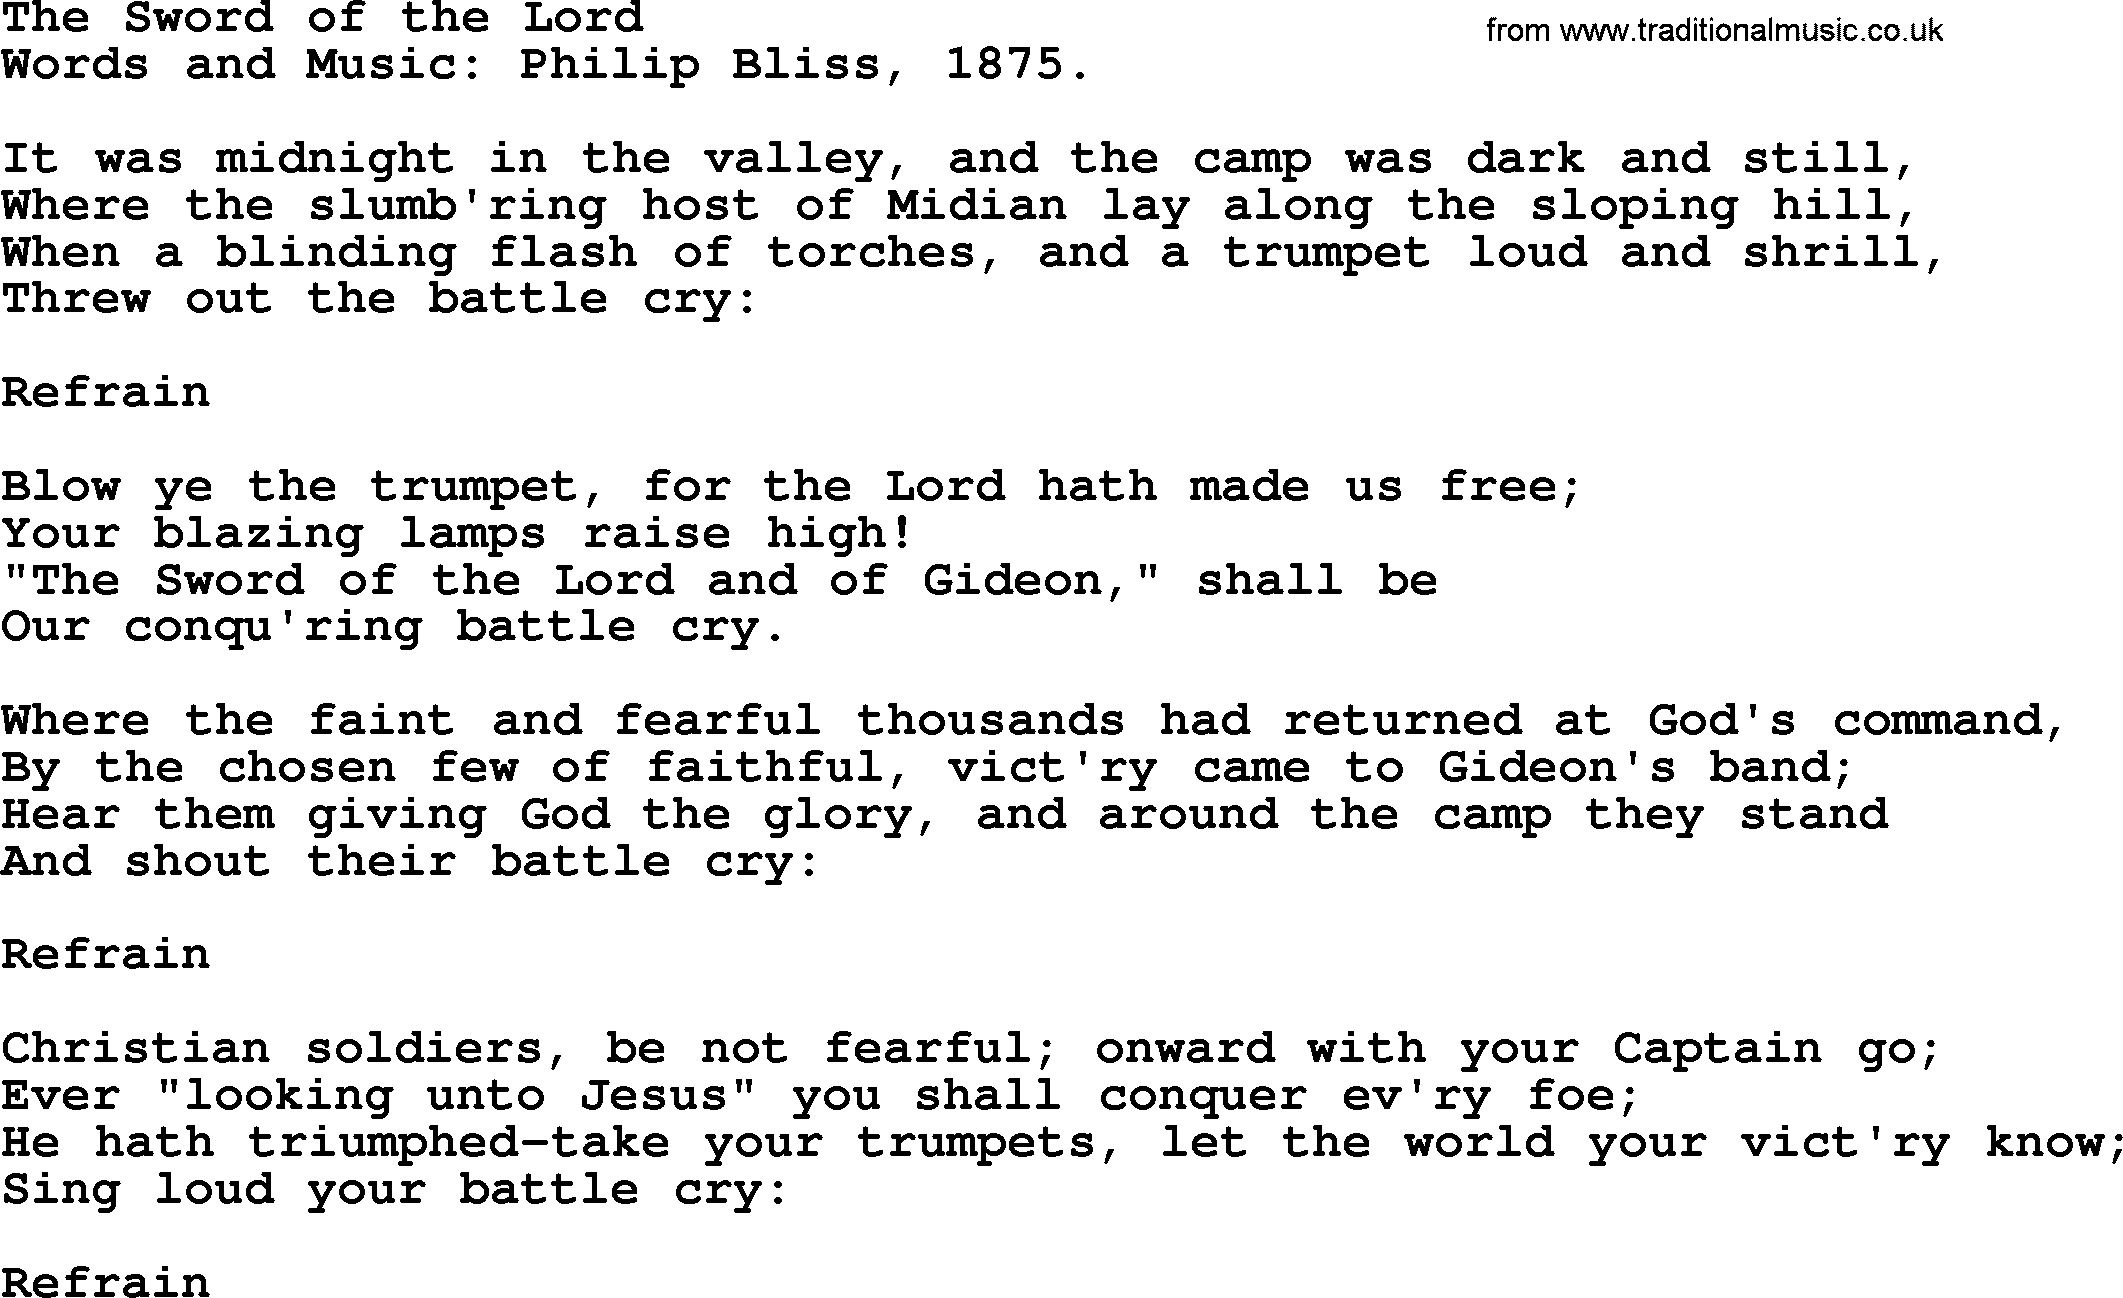 Philip Bliss Song: The Sword Of The Lord, lyrics